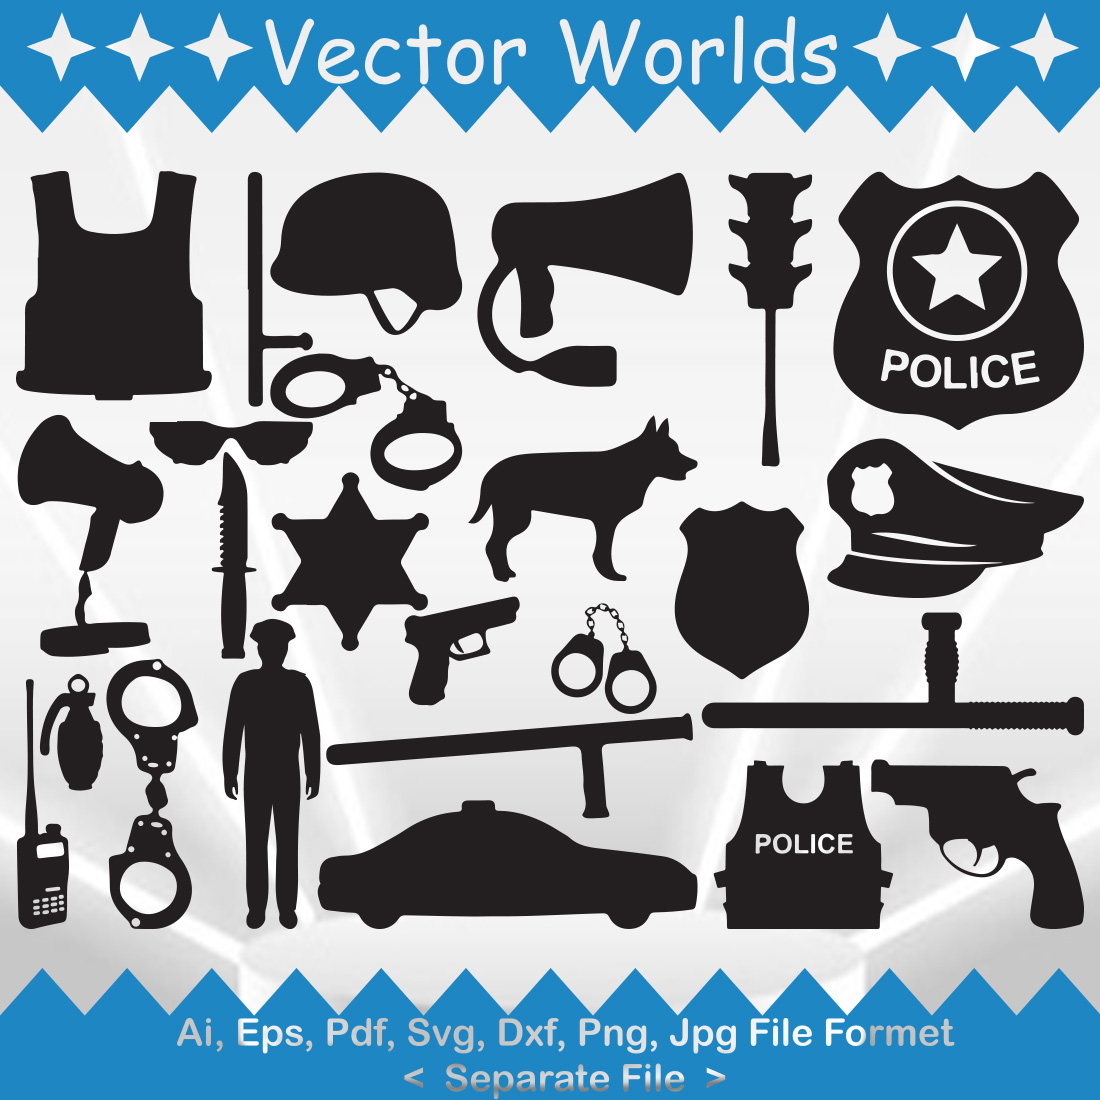 Police Equipment SVG Vector Design cover image.